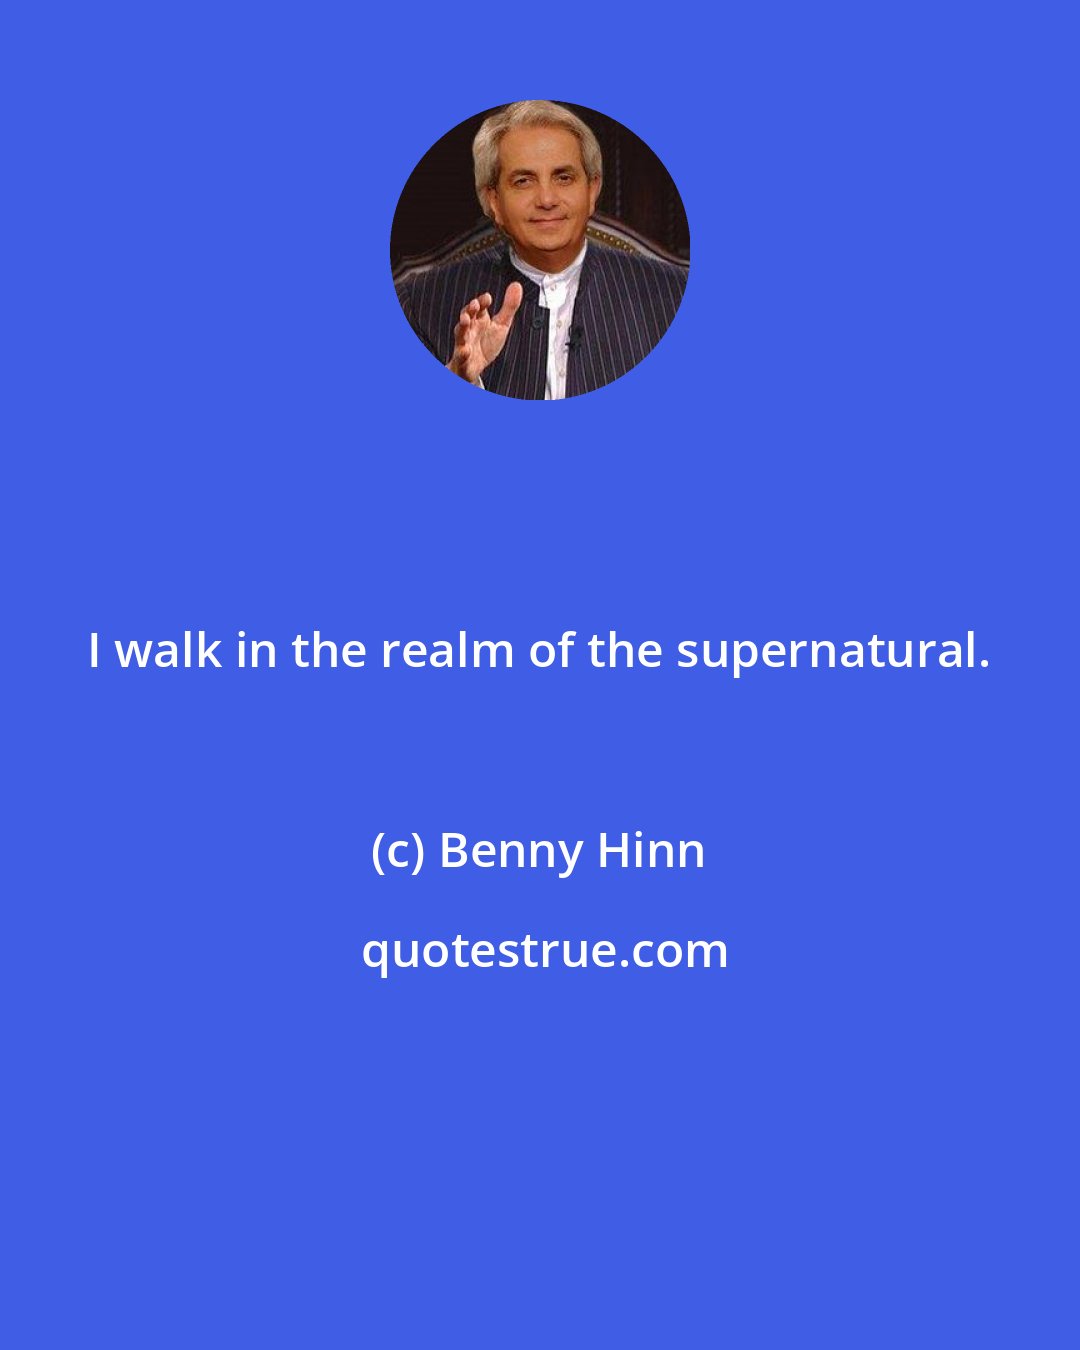 Benny Hinn: I walk in the realm of the supernatural.